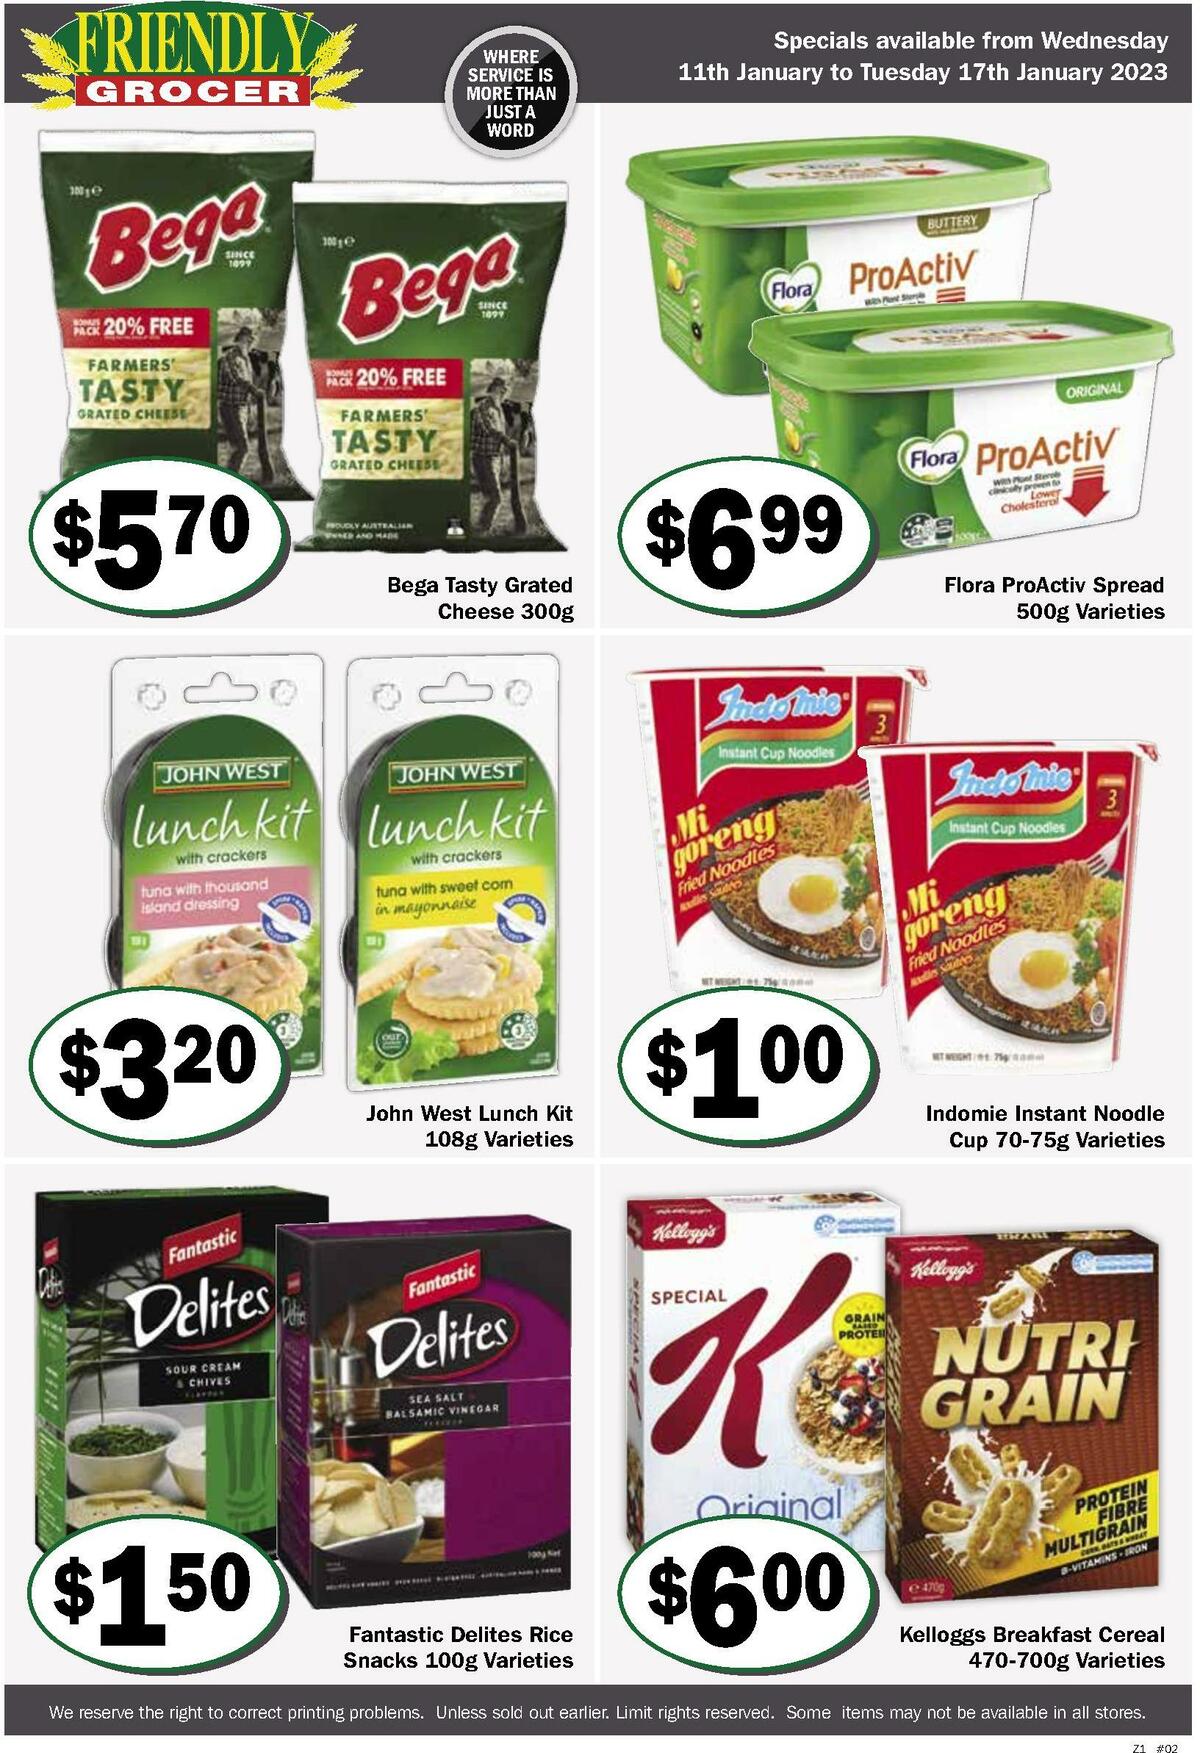 Friendly Grocer Catalogues from 11 January